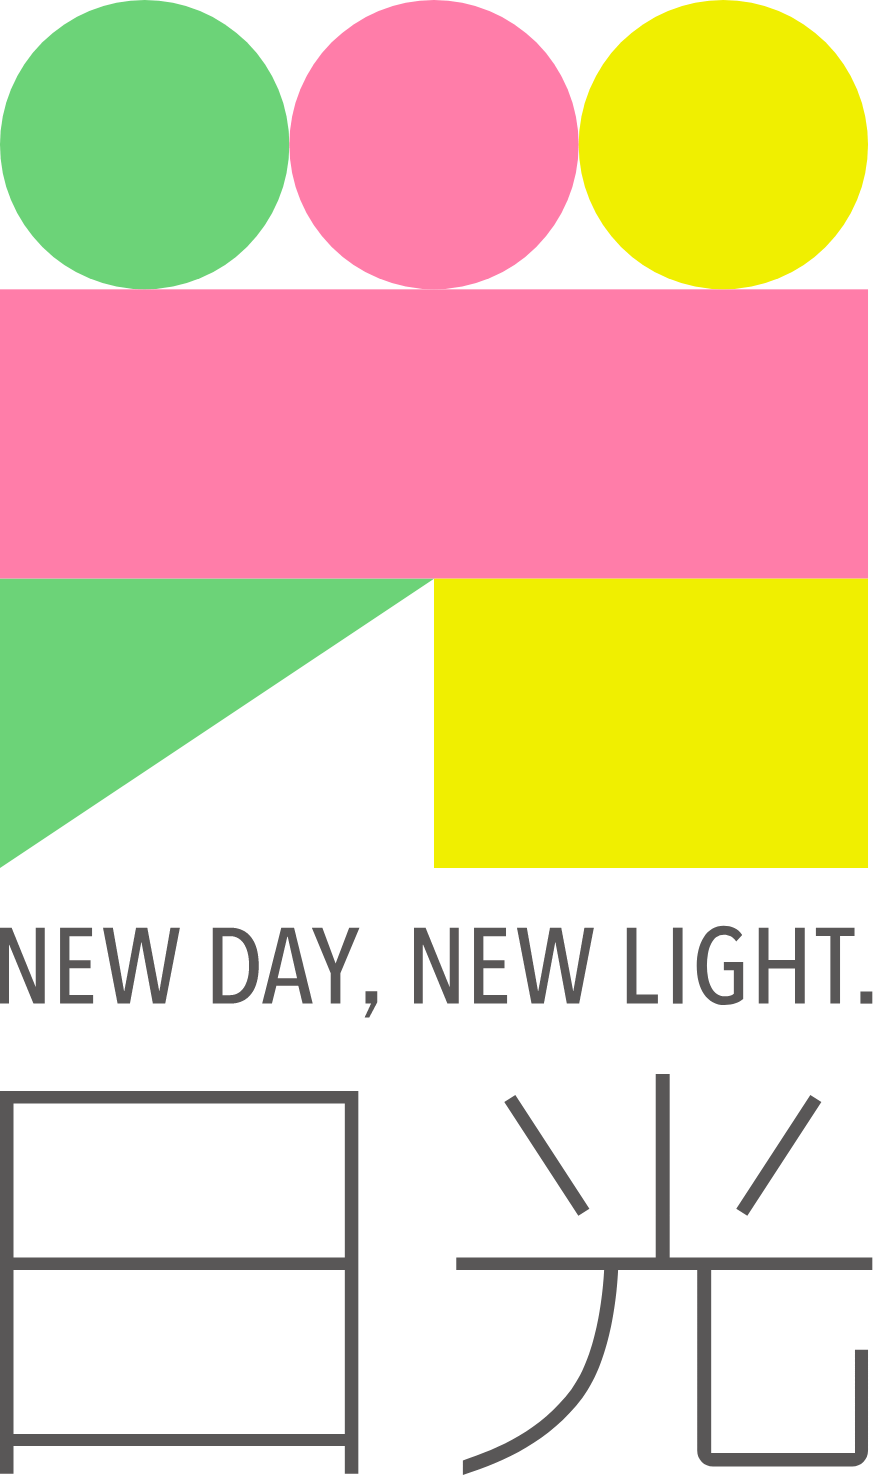 NEW DAY, NEW LIGHT.日光シンボルマーク